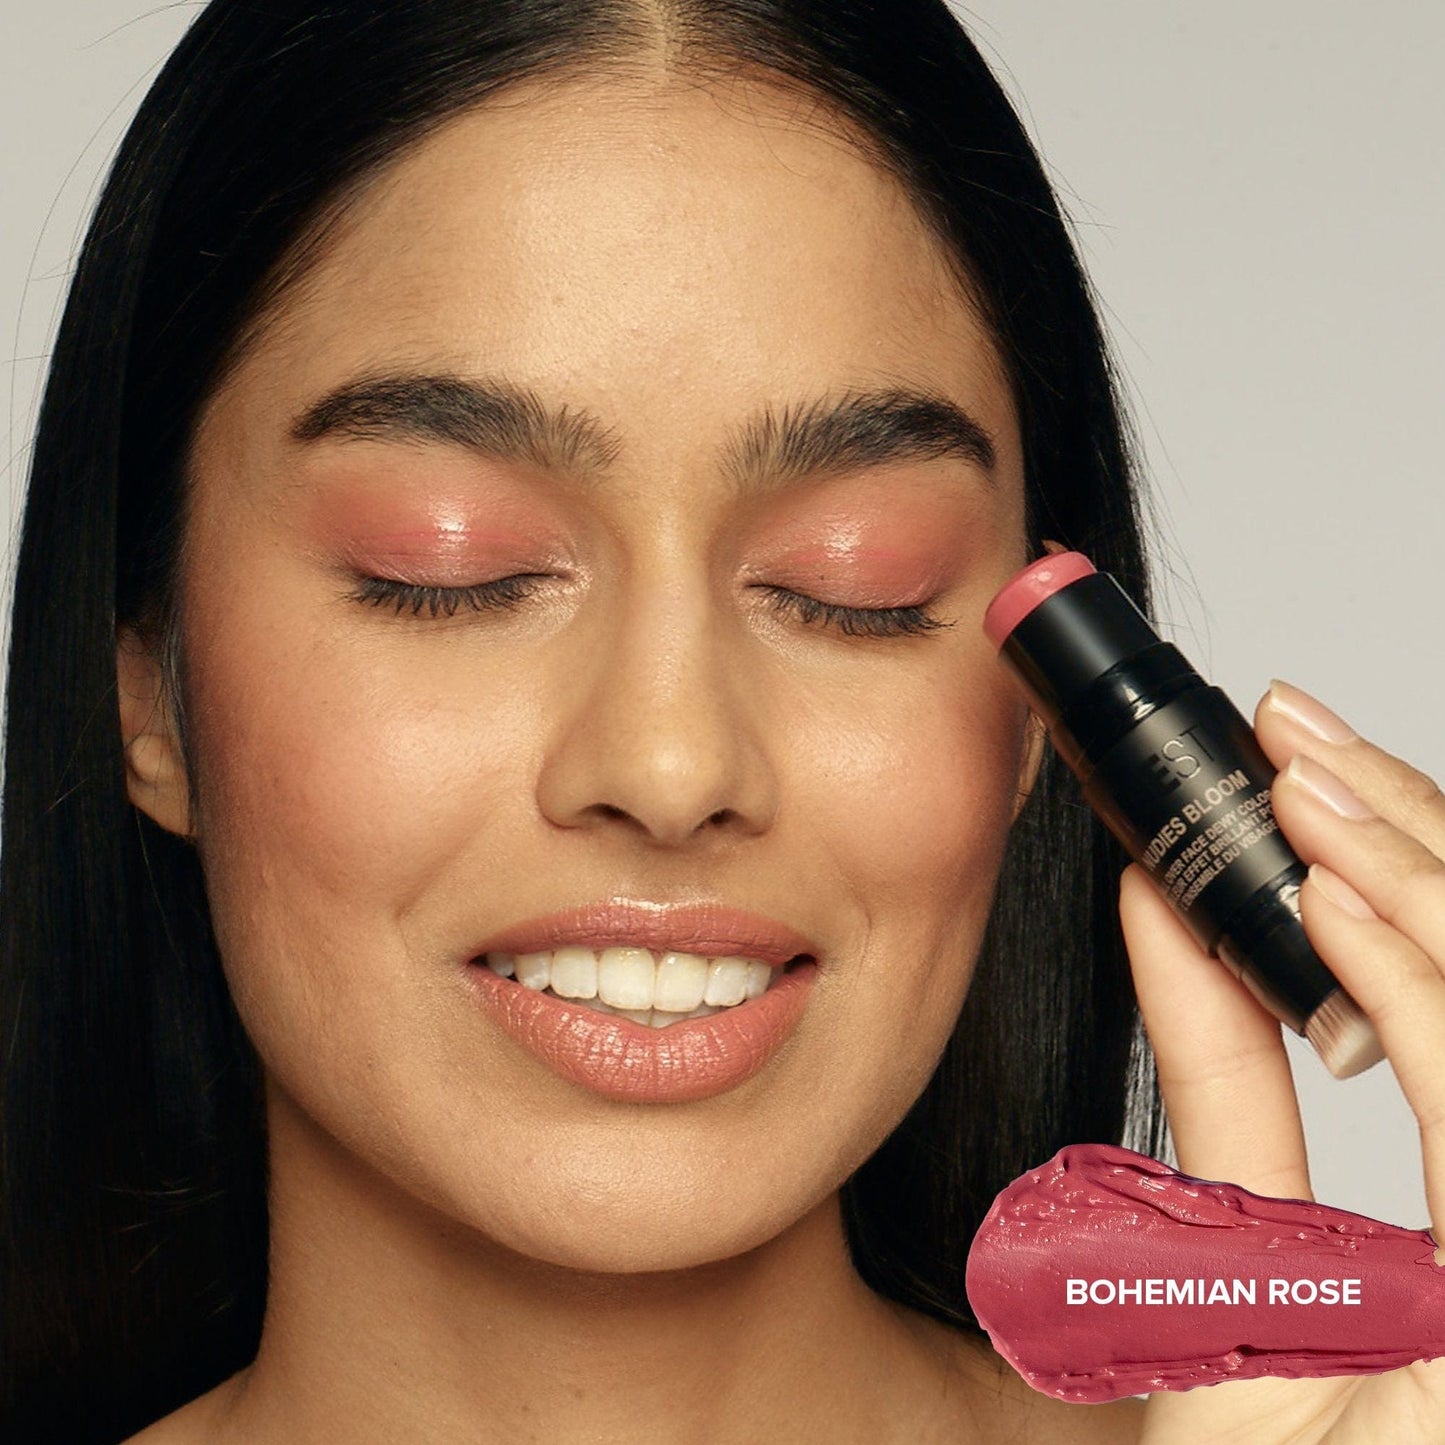 Young woman with her eyes closed applying Nudies Bloom Bohemian Rose on her eyelids